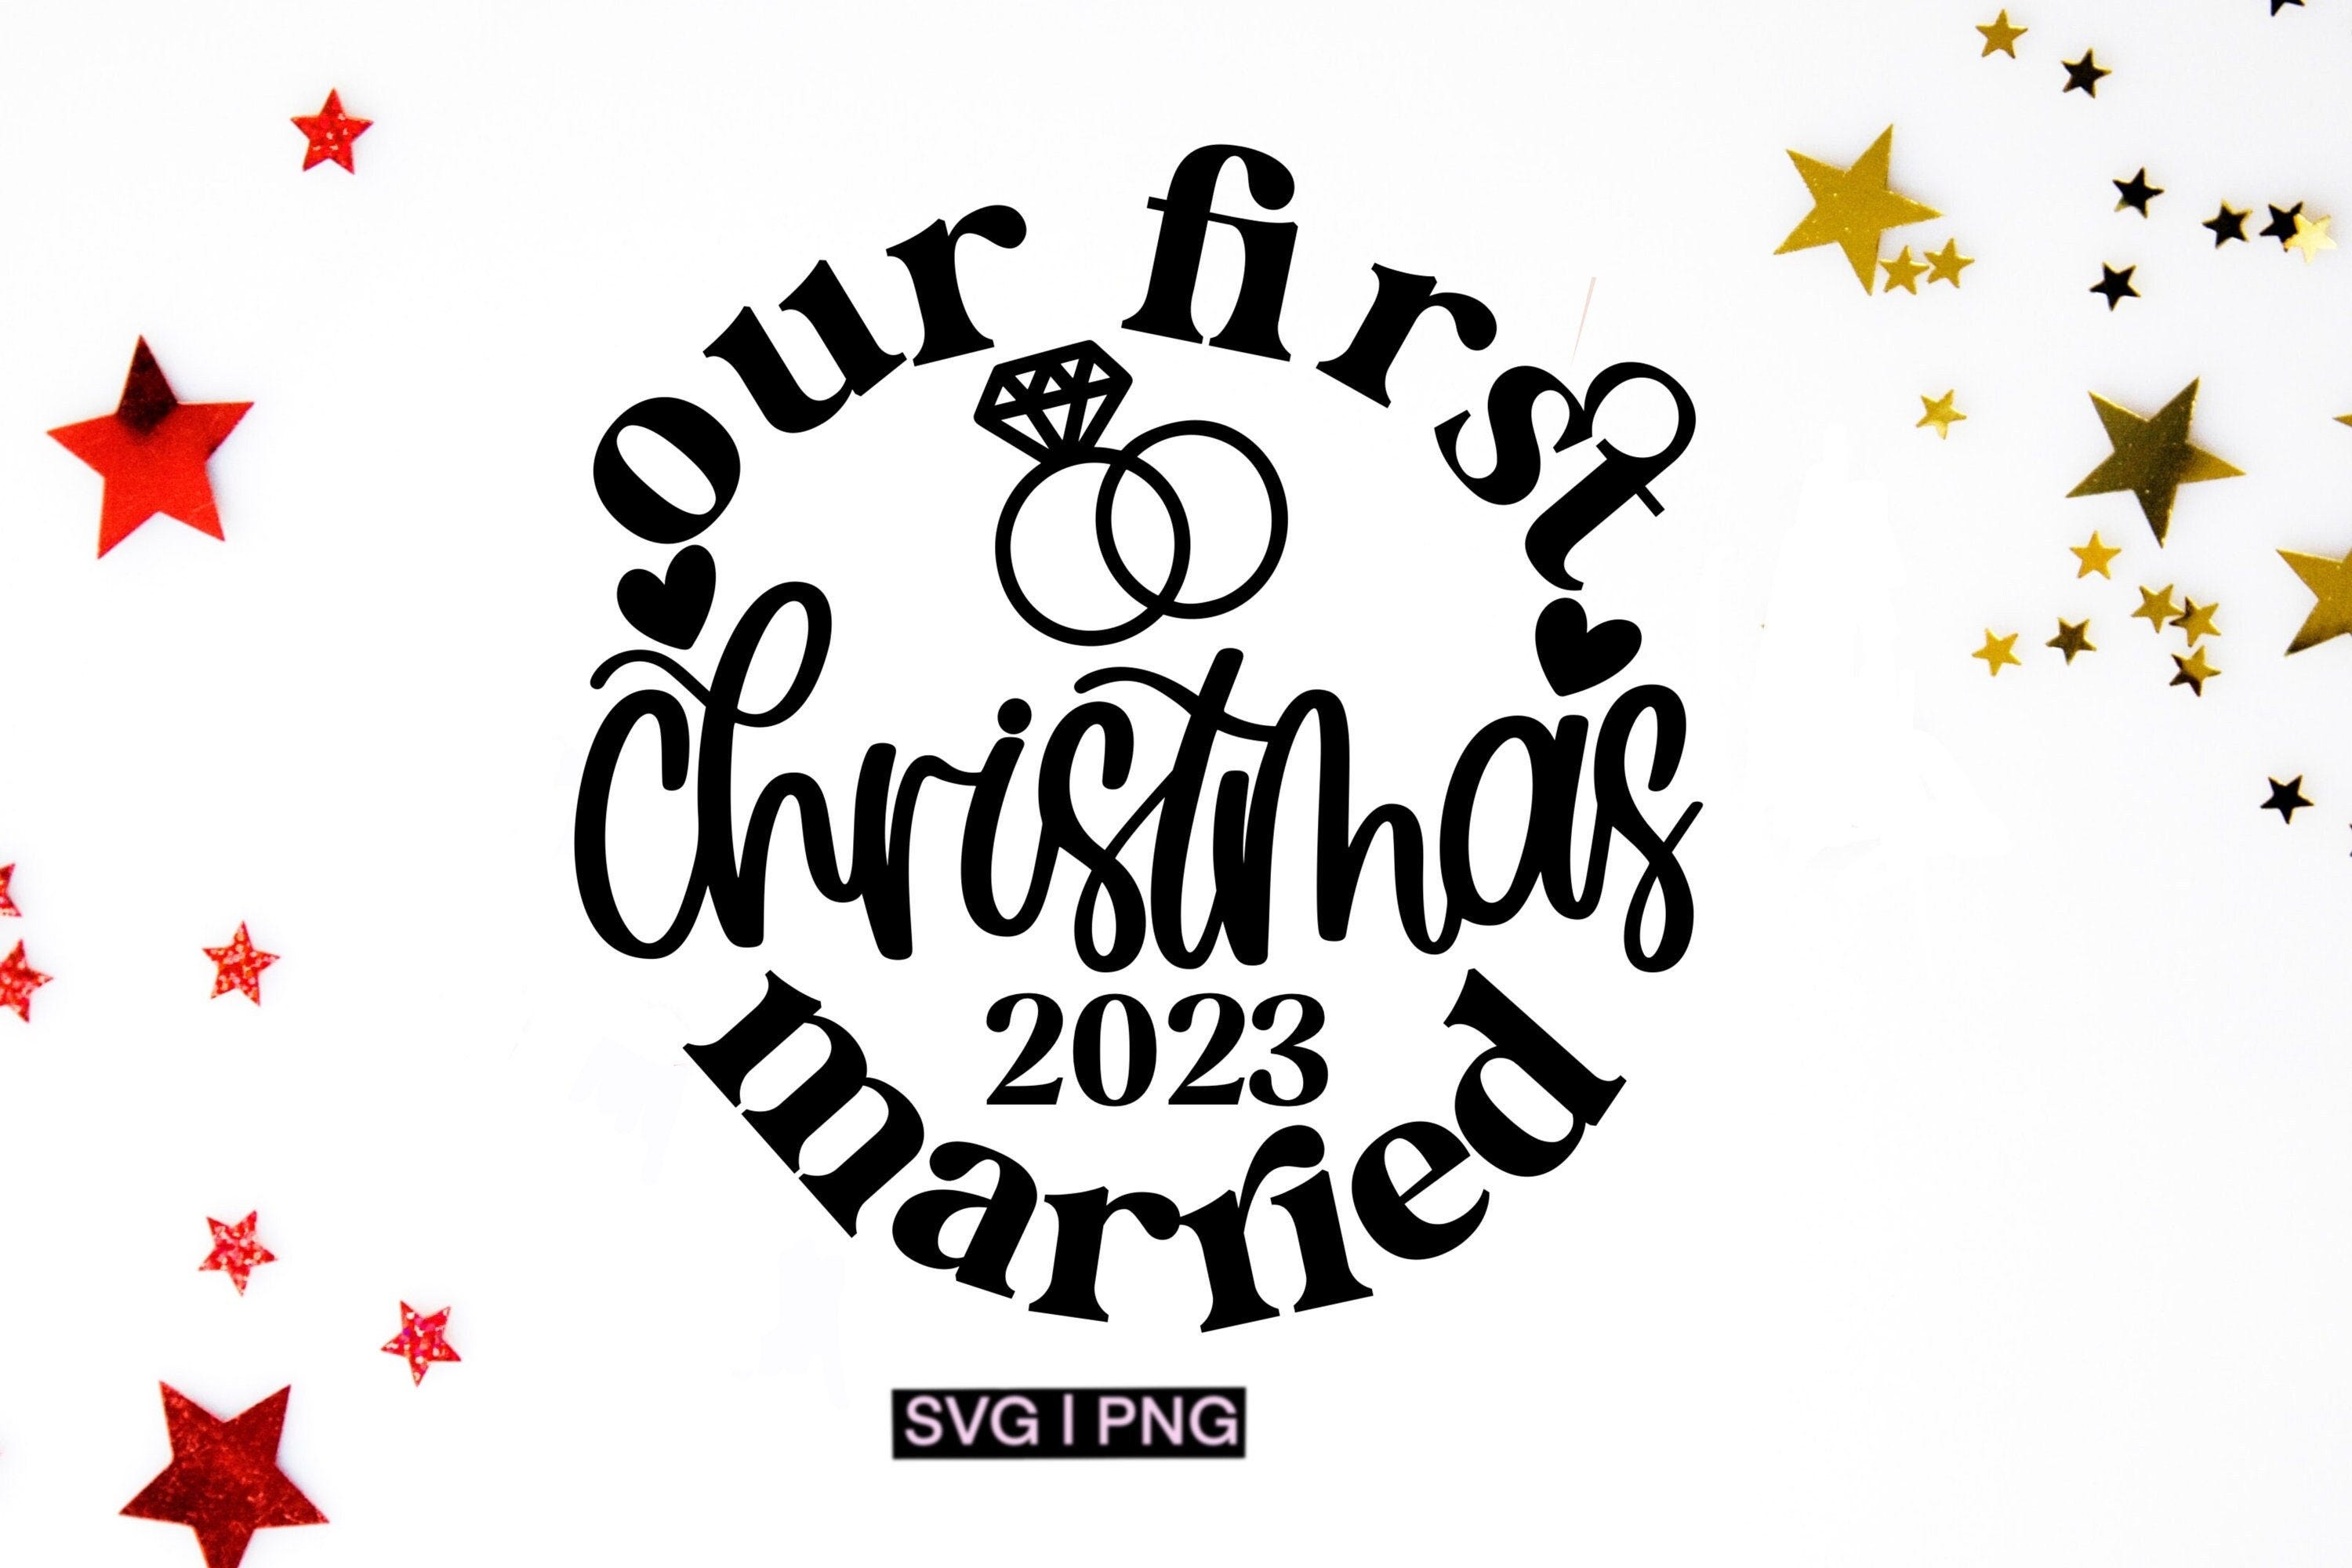 Our first christmas married svg, newlywed ornament svg, wedding ornament svg, first christmas as mr & mrs svg, couple ornament svg, png